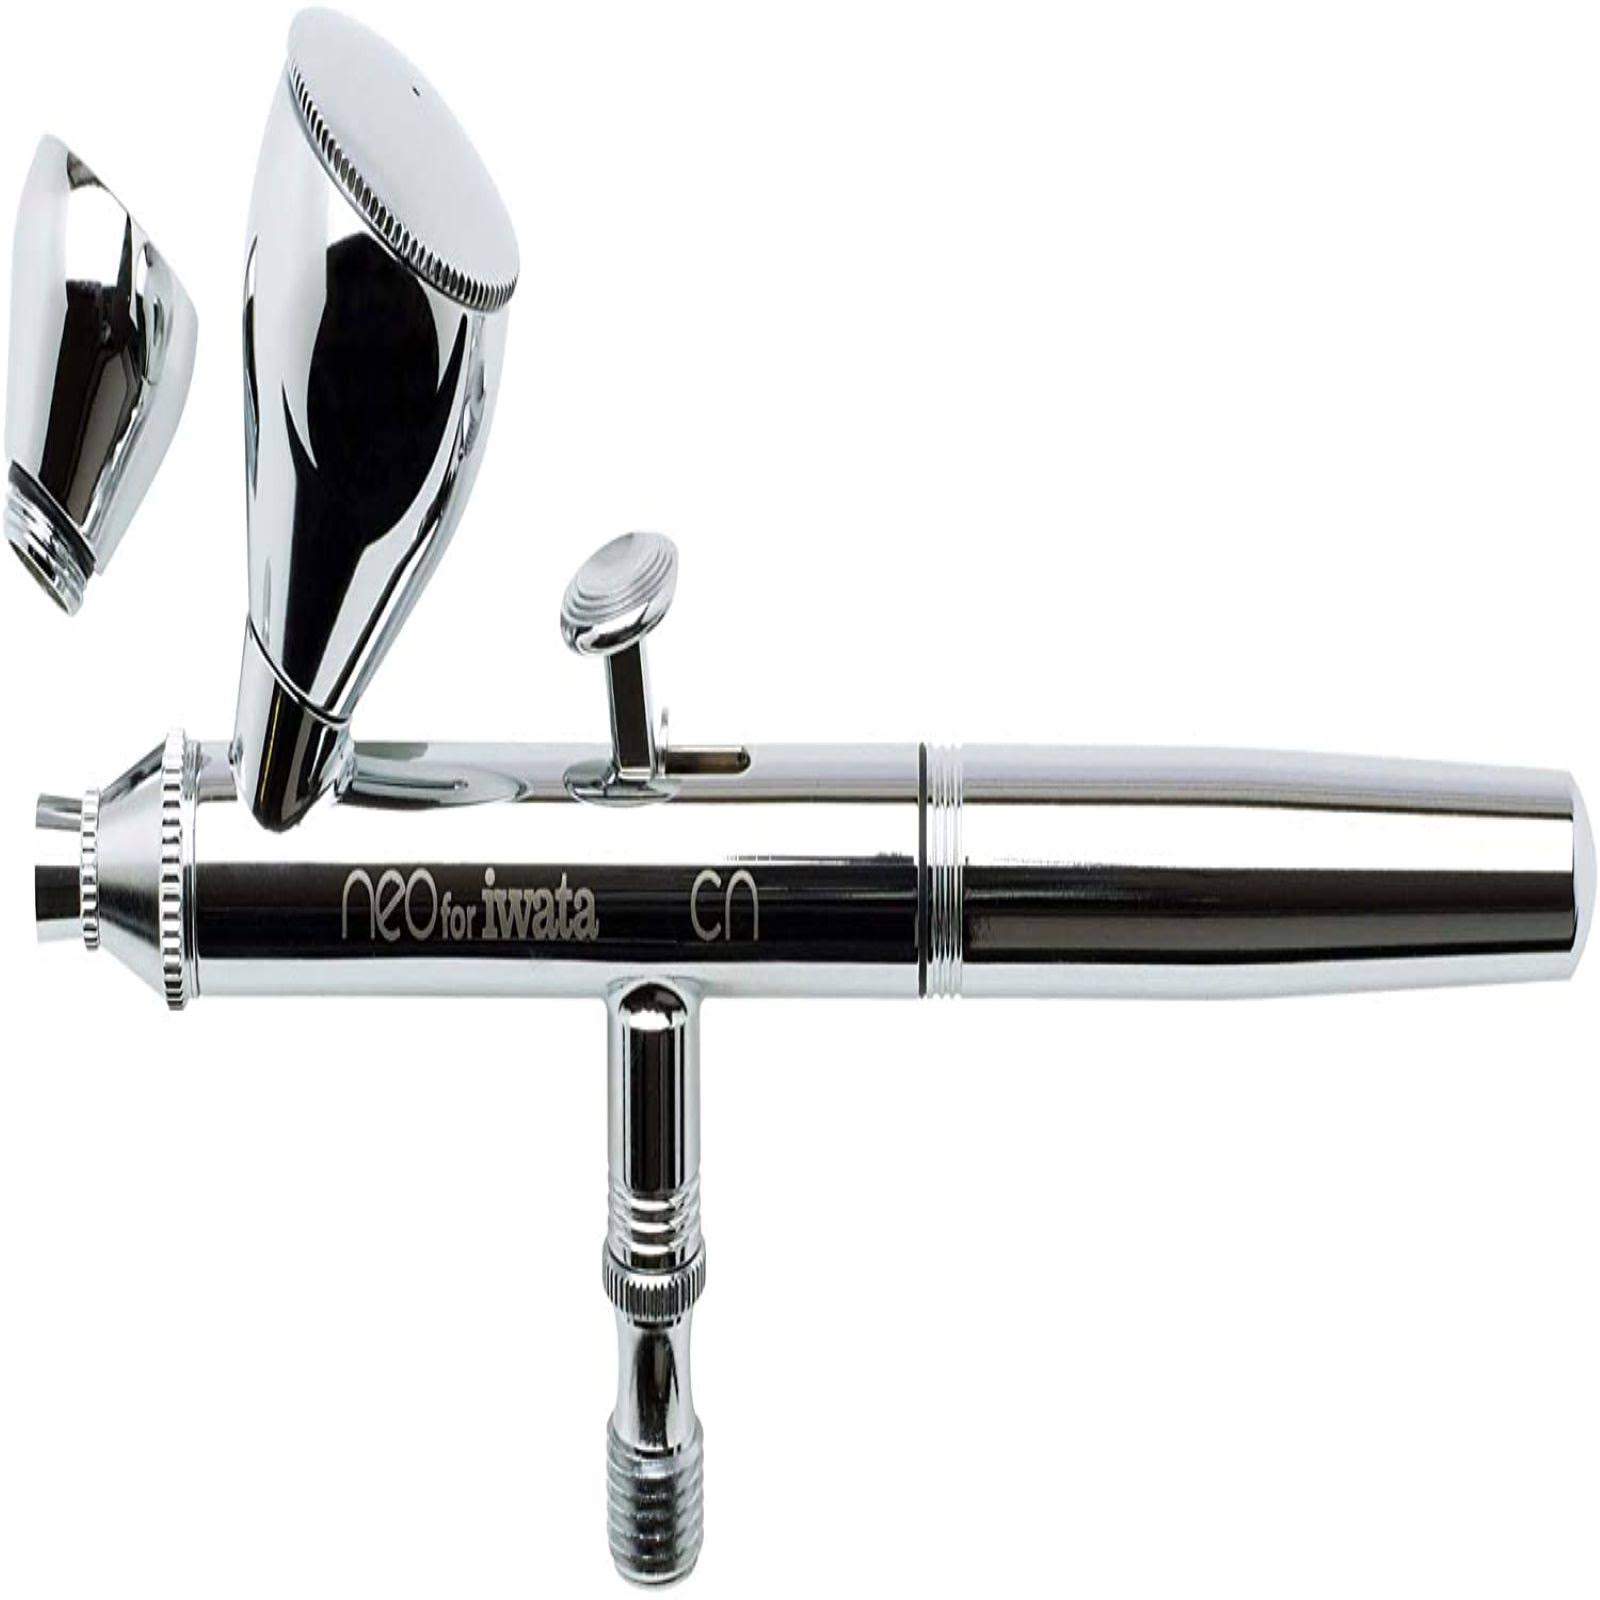 Neo Gravity Feed Dual Action Airbrush